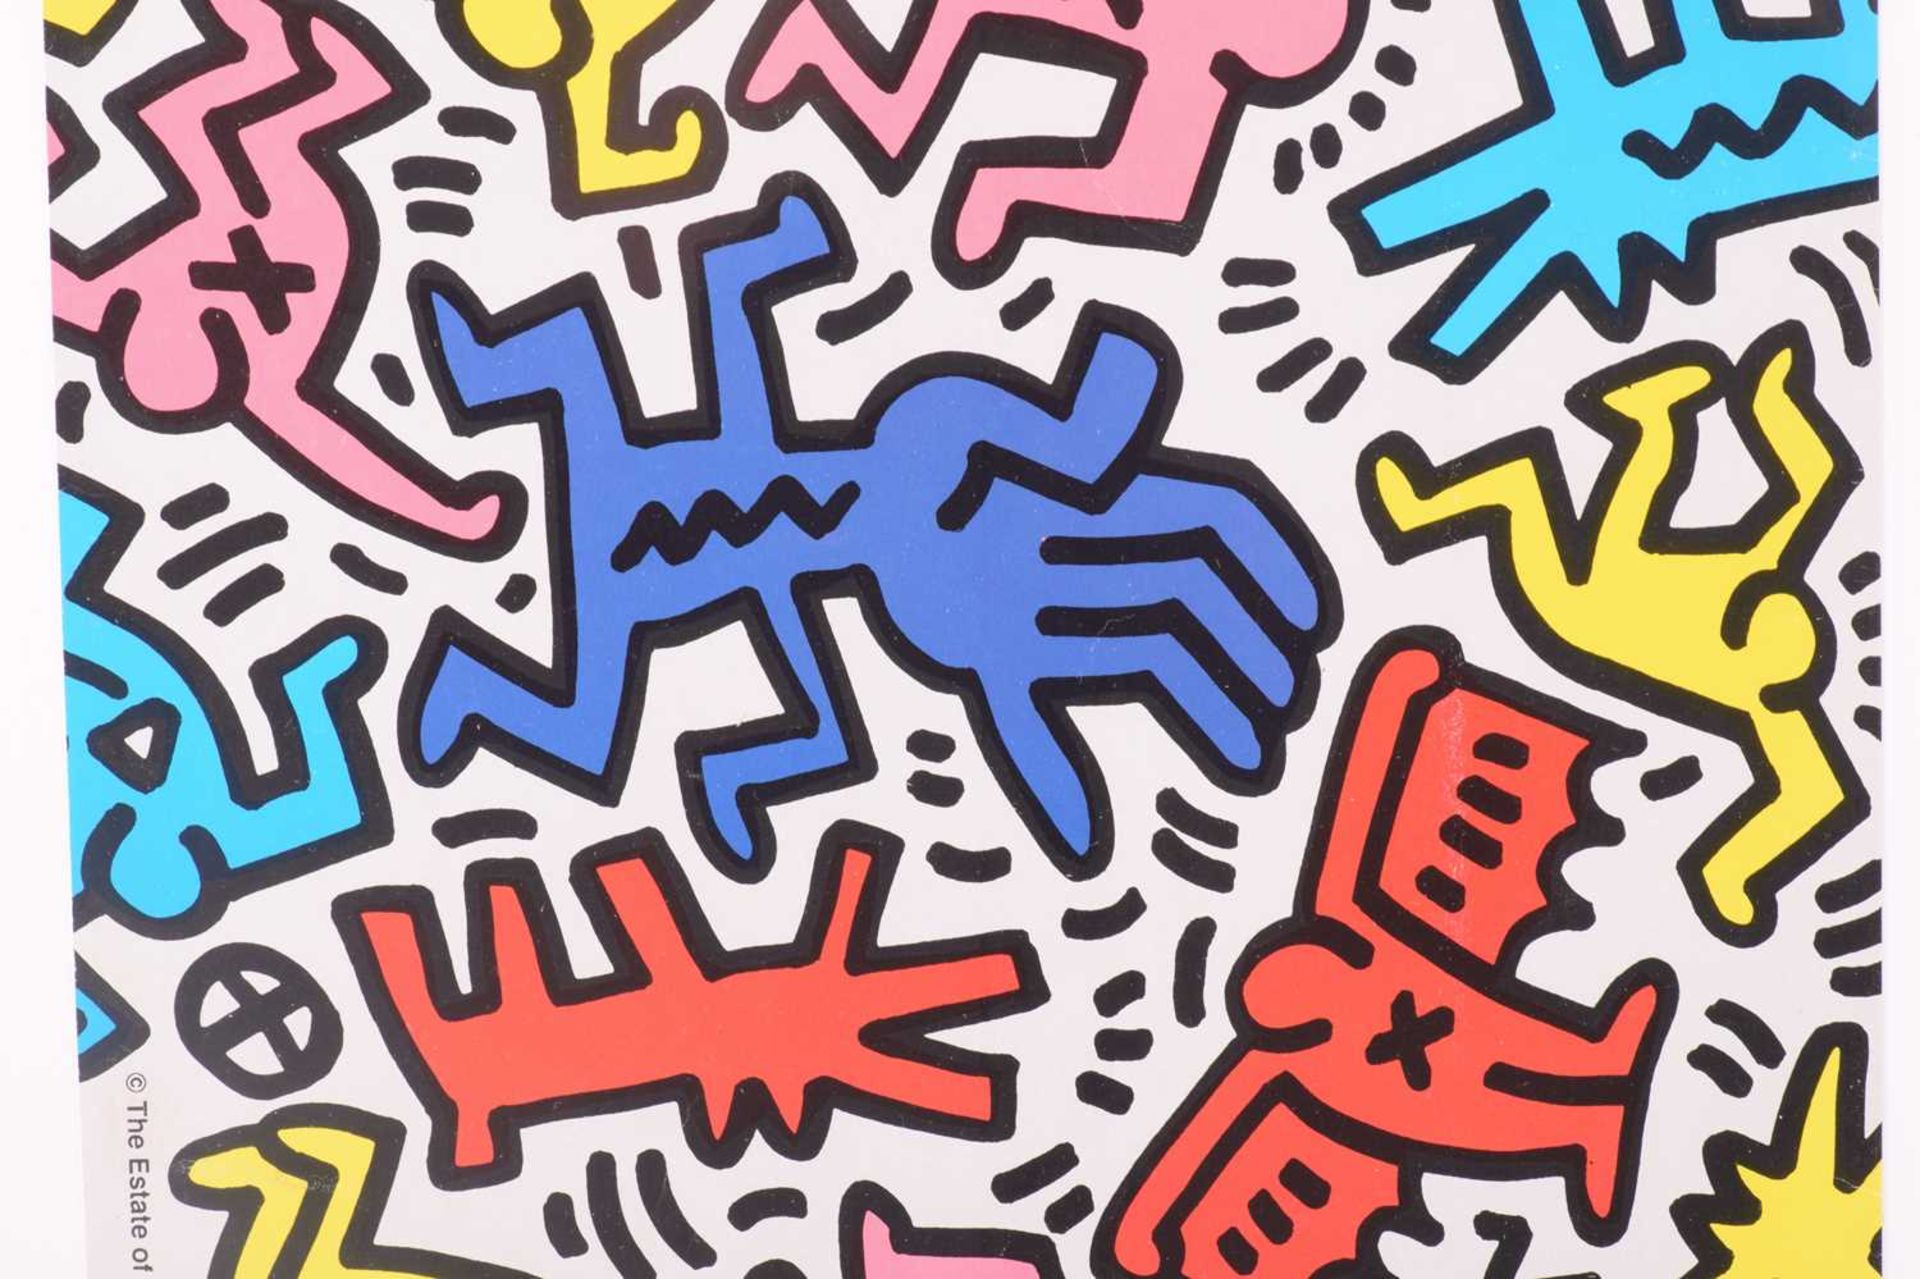 Keith Haring (1958-1990), 'Dancing People', colour print, 38 cm x 26.5 cm framed and glazed. - Image 4 of 7